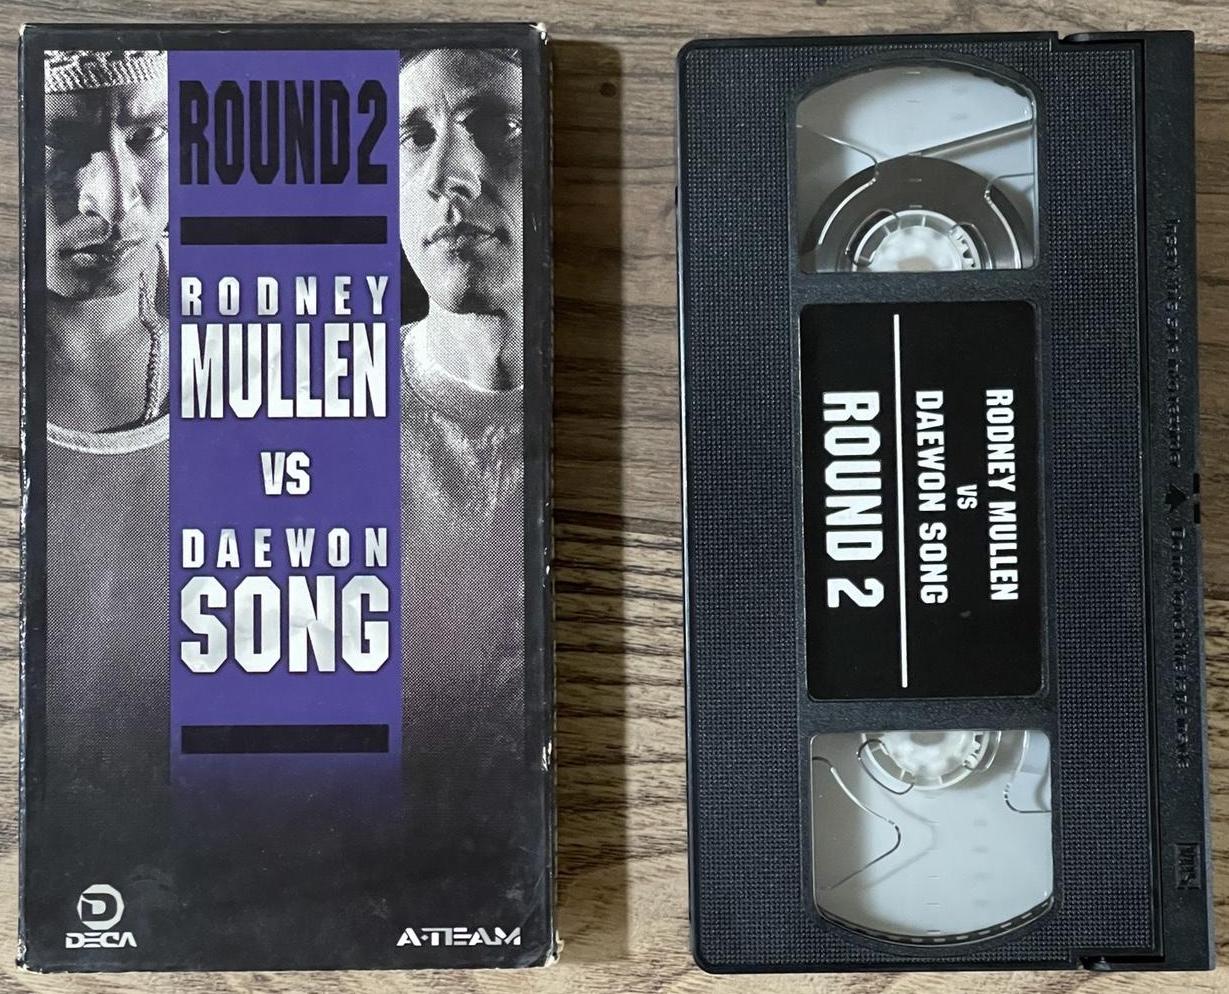 Rodney Mullen vs Daewon Song: Round 2 feature image